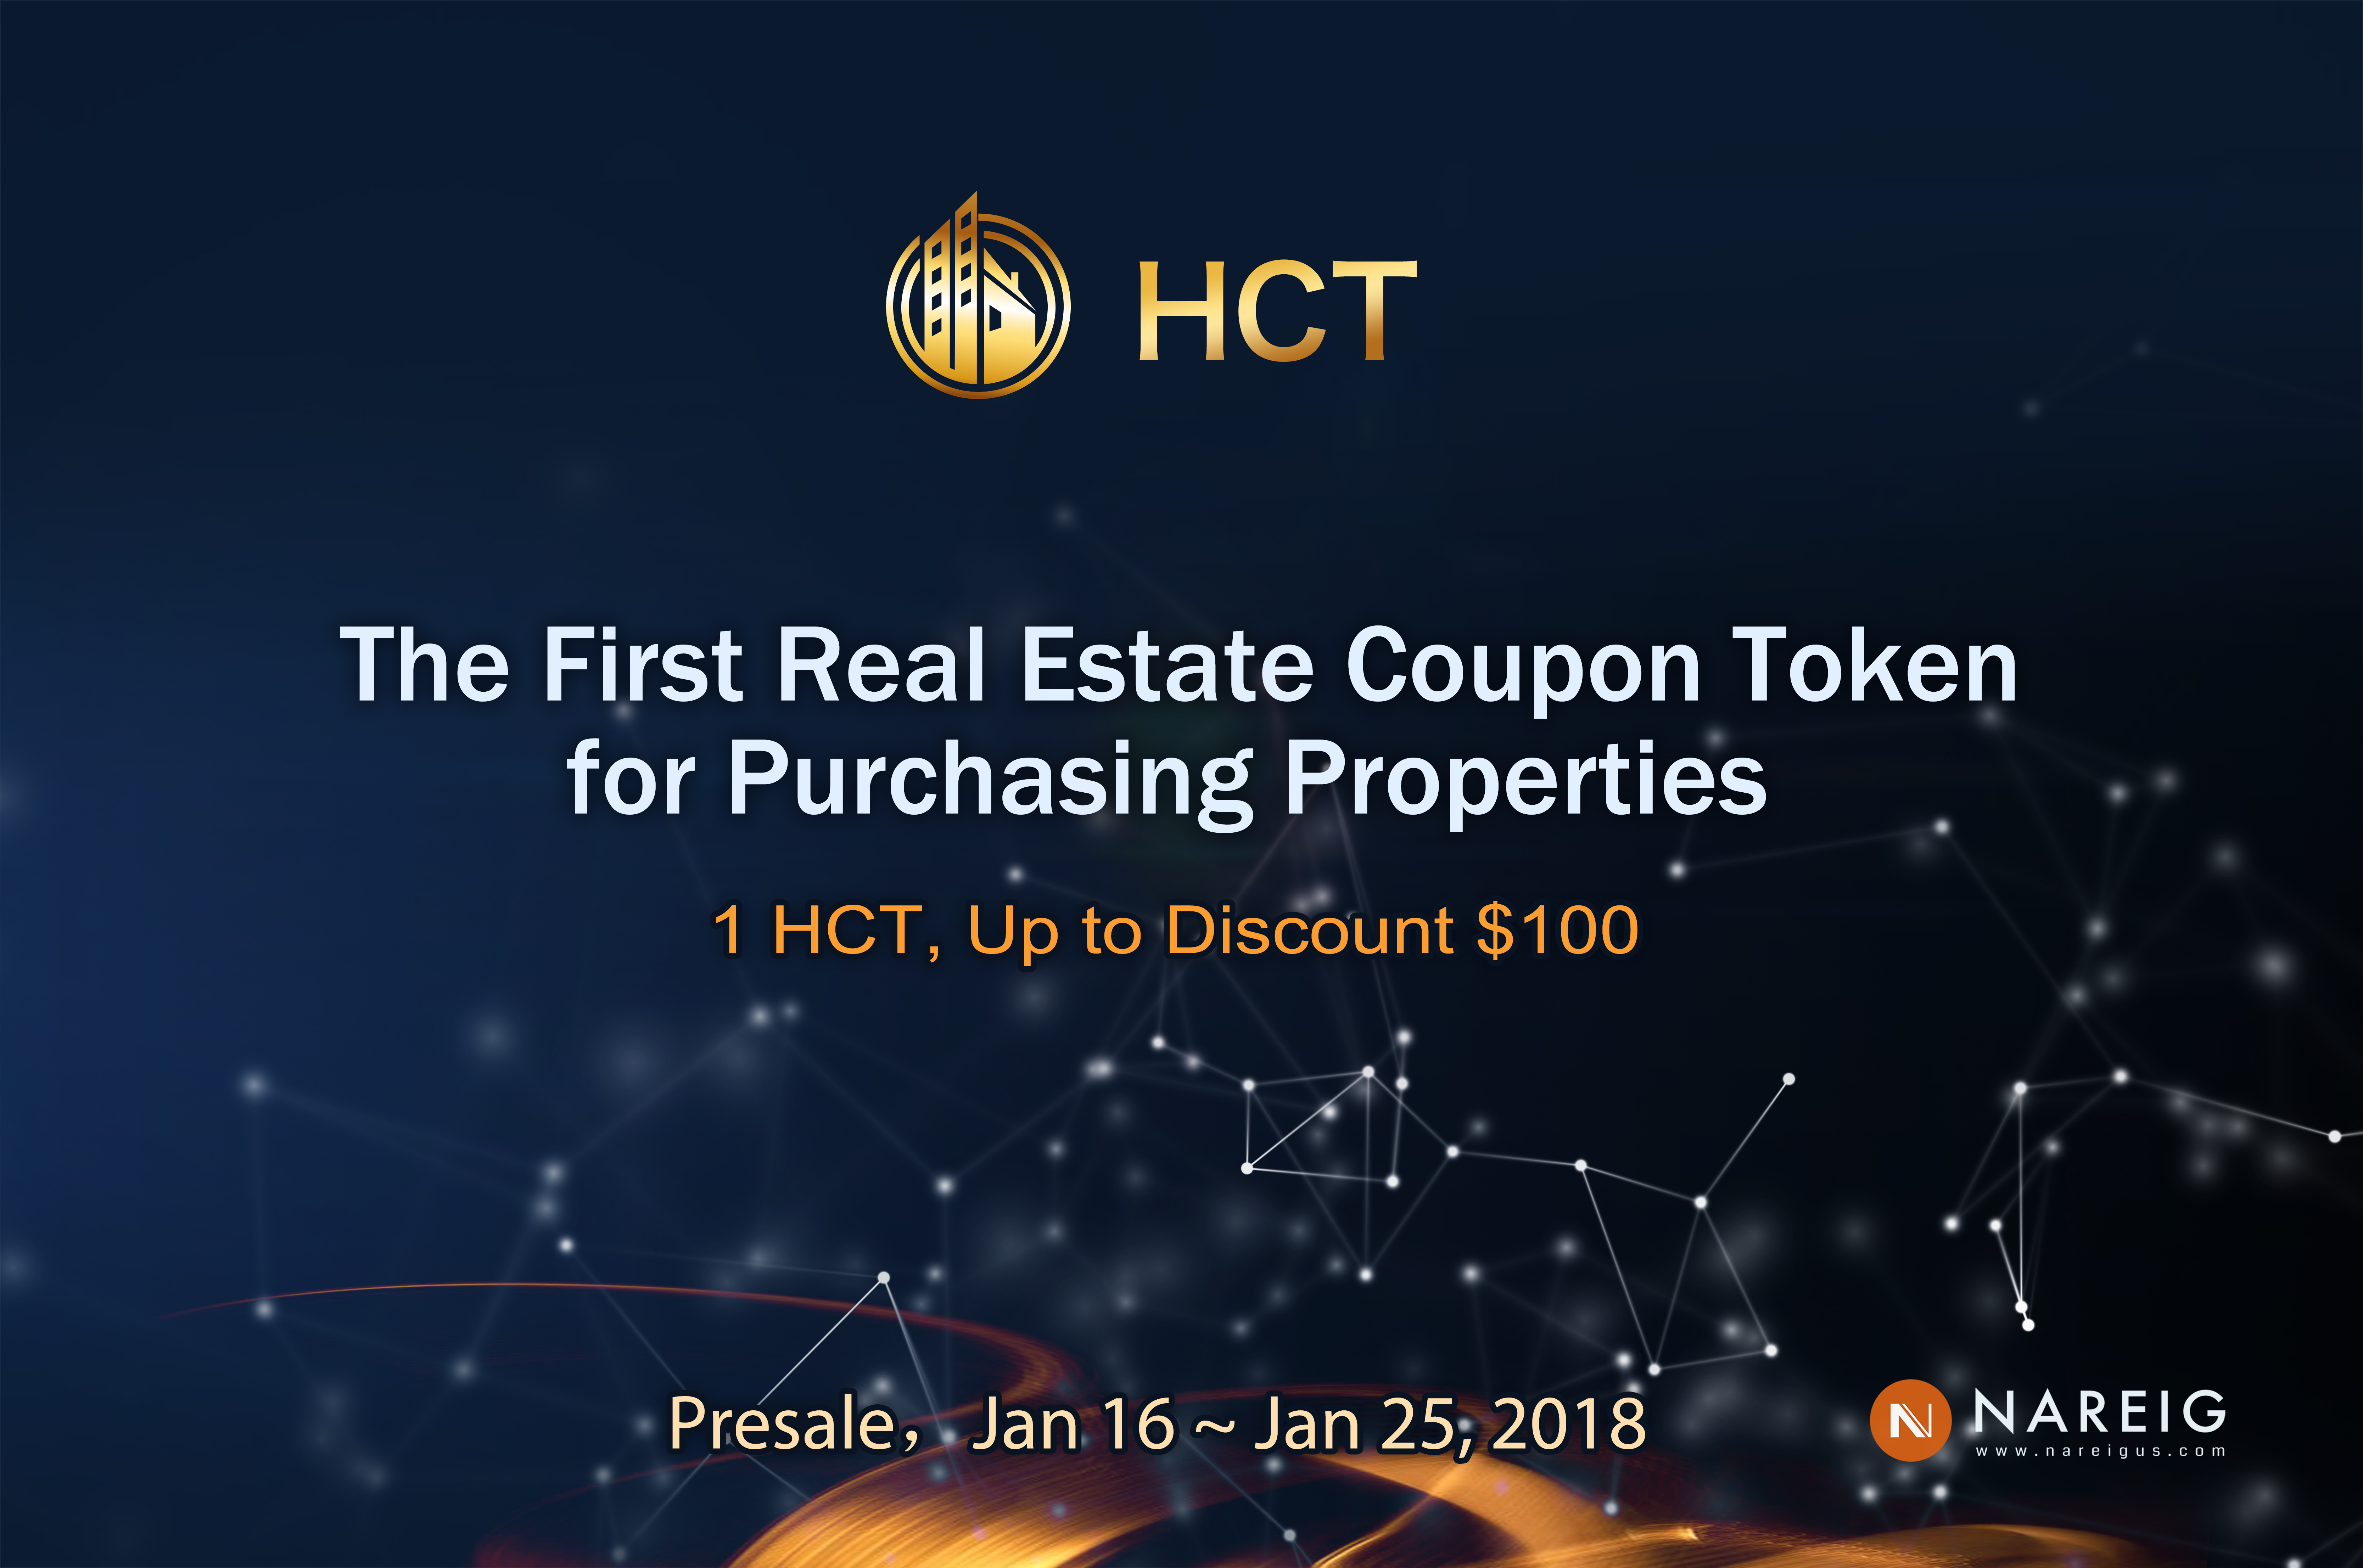 PR: Nareig Announces First Real Estate Coupon Token for Purchasing Properties